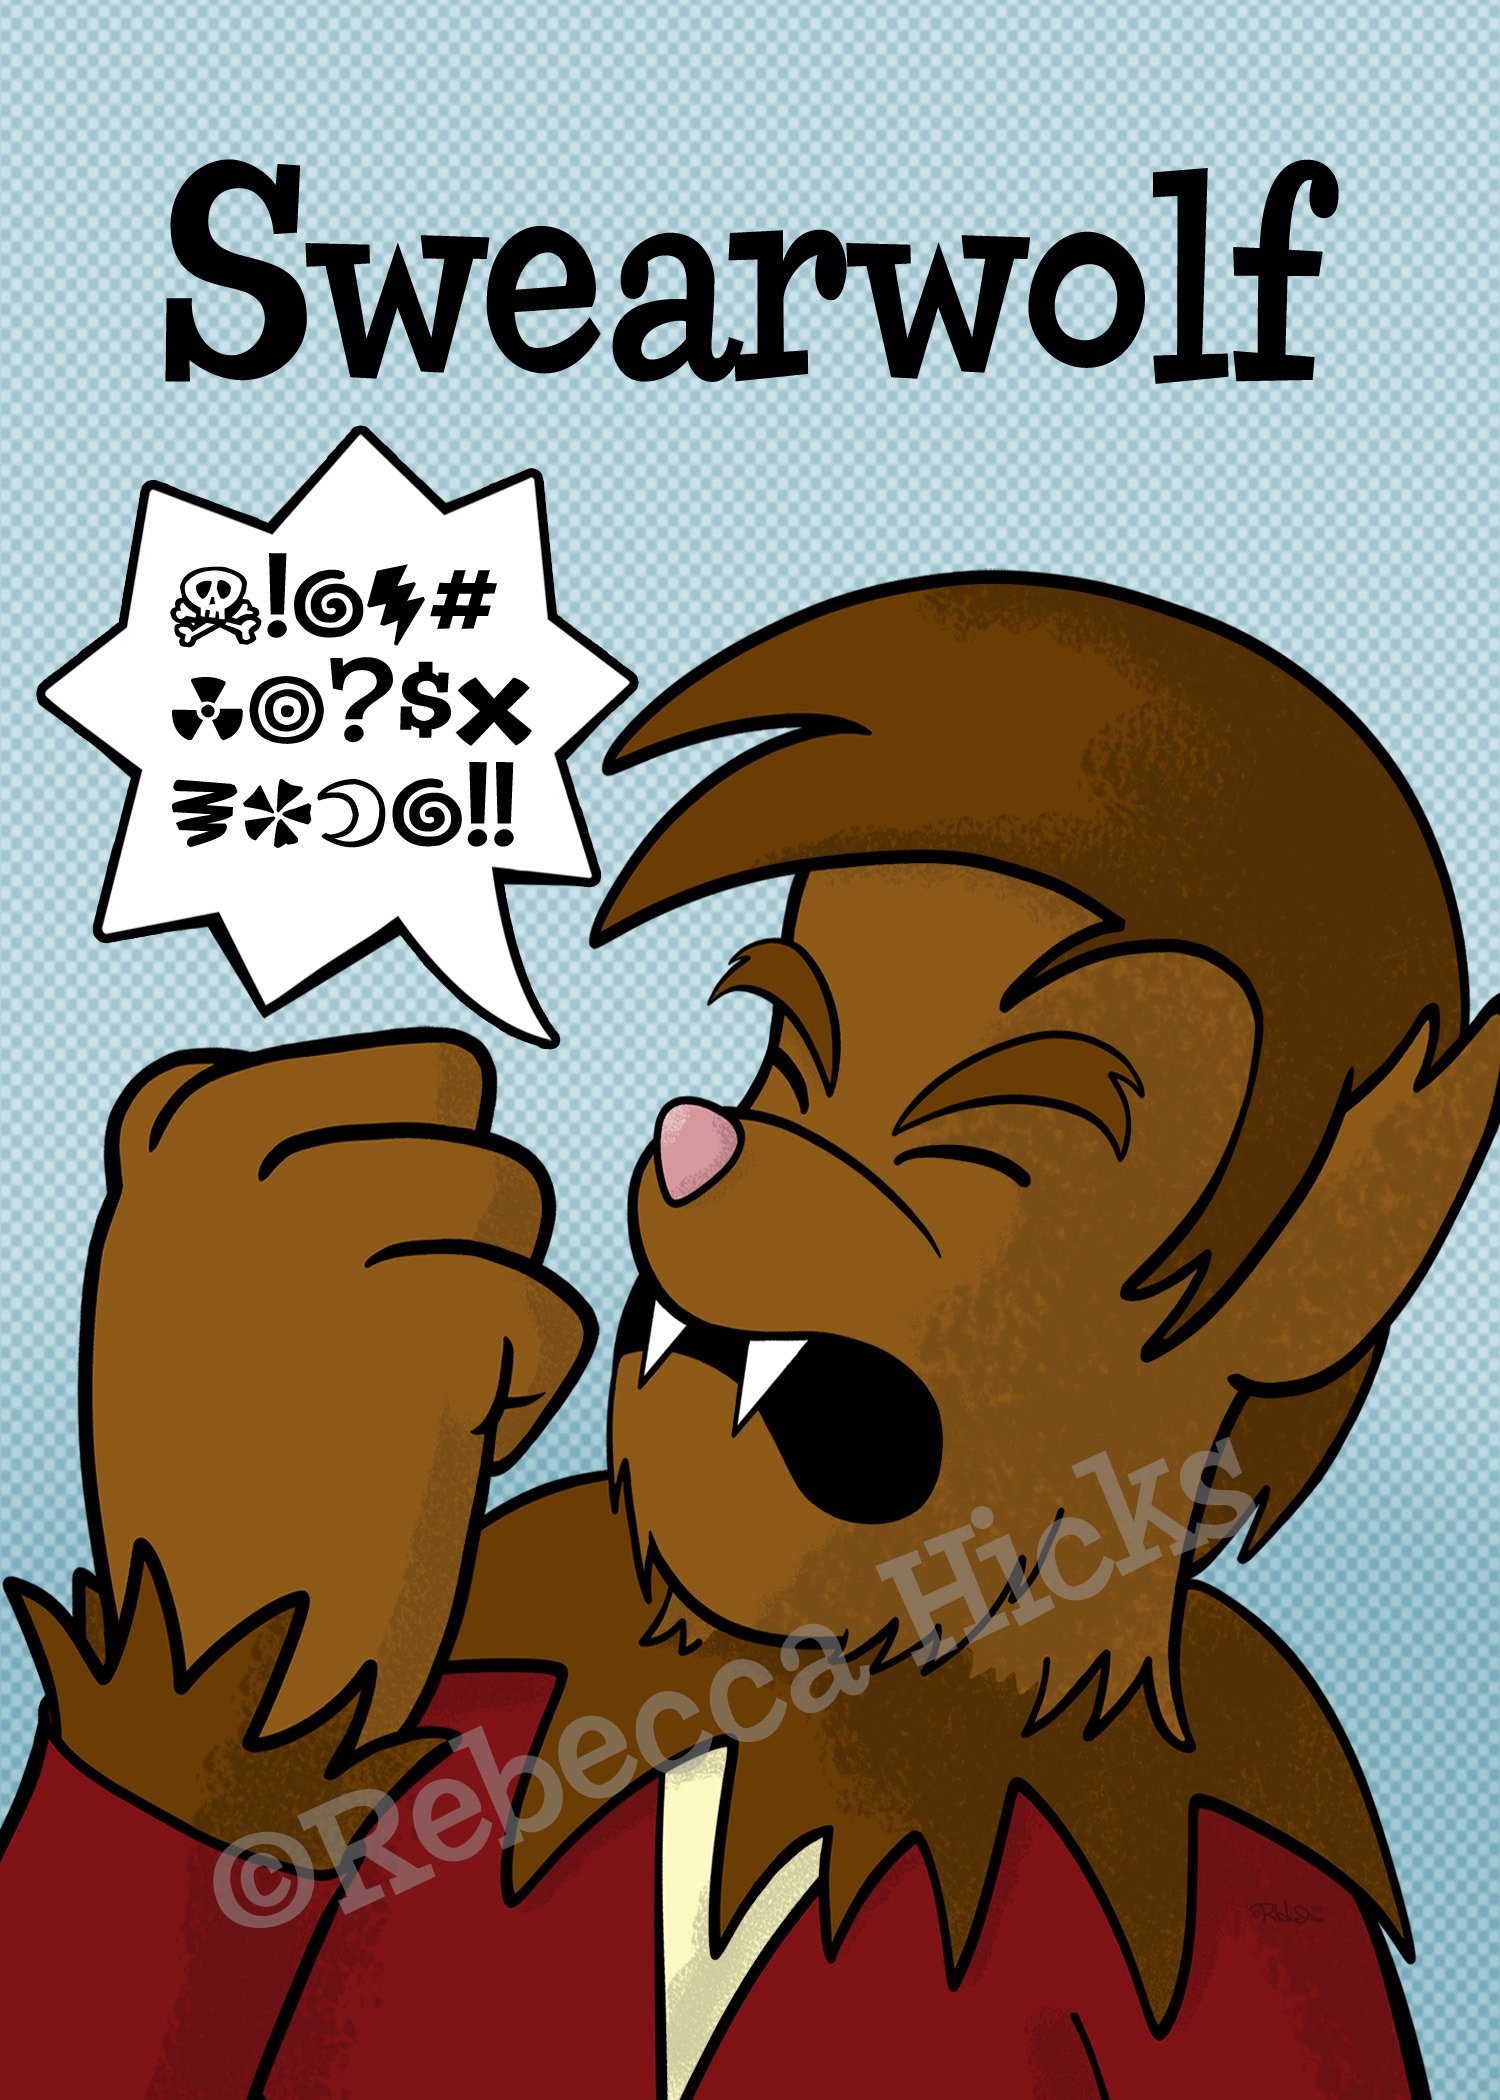 Art print depicting an angry Wolfie with a spiky speech balloon full of grawlix, titled “Swearwolf”